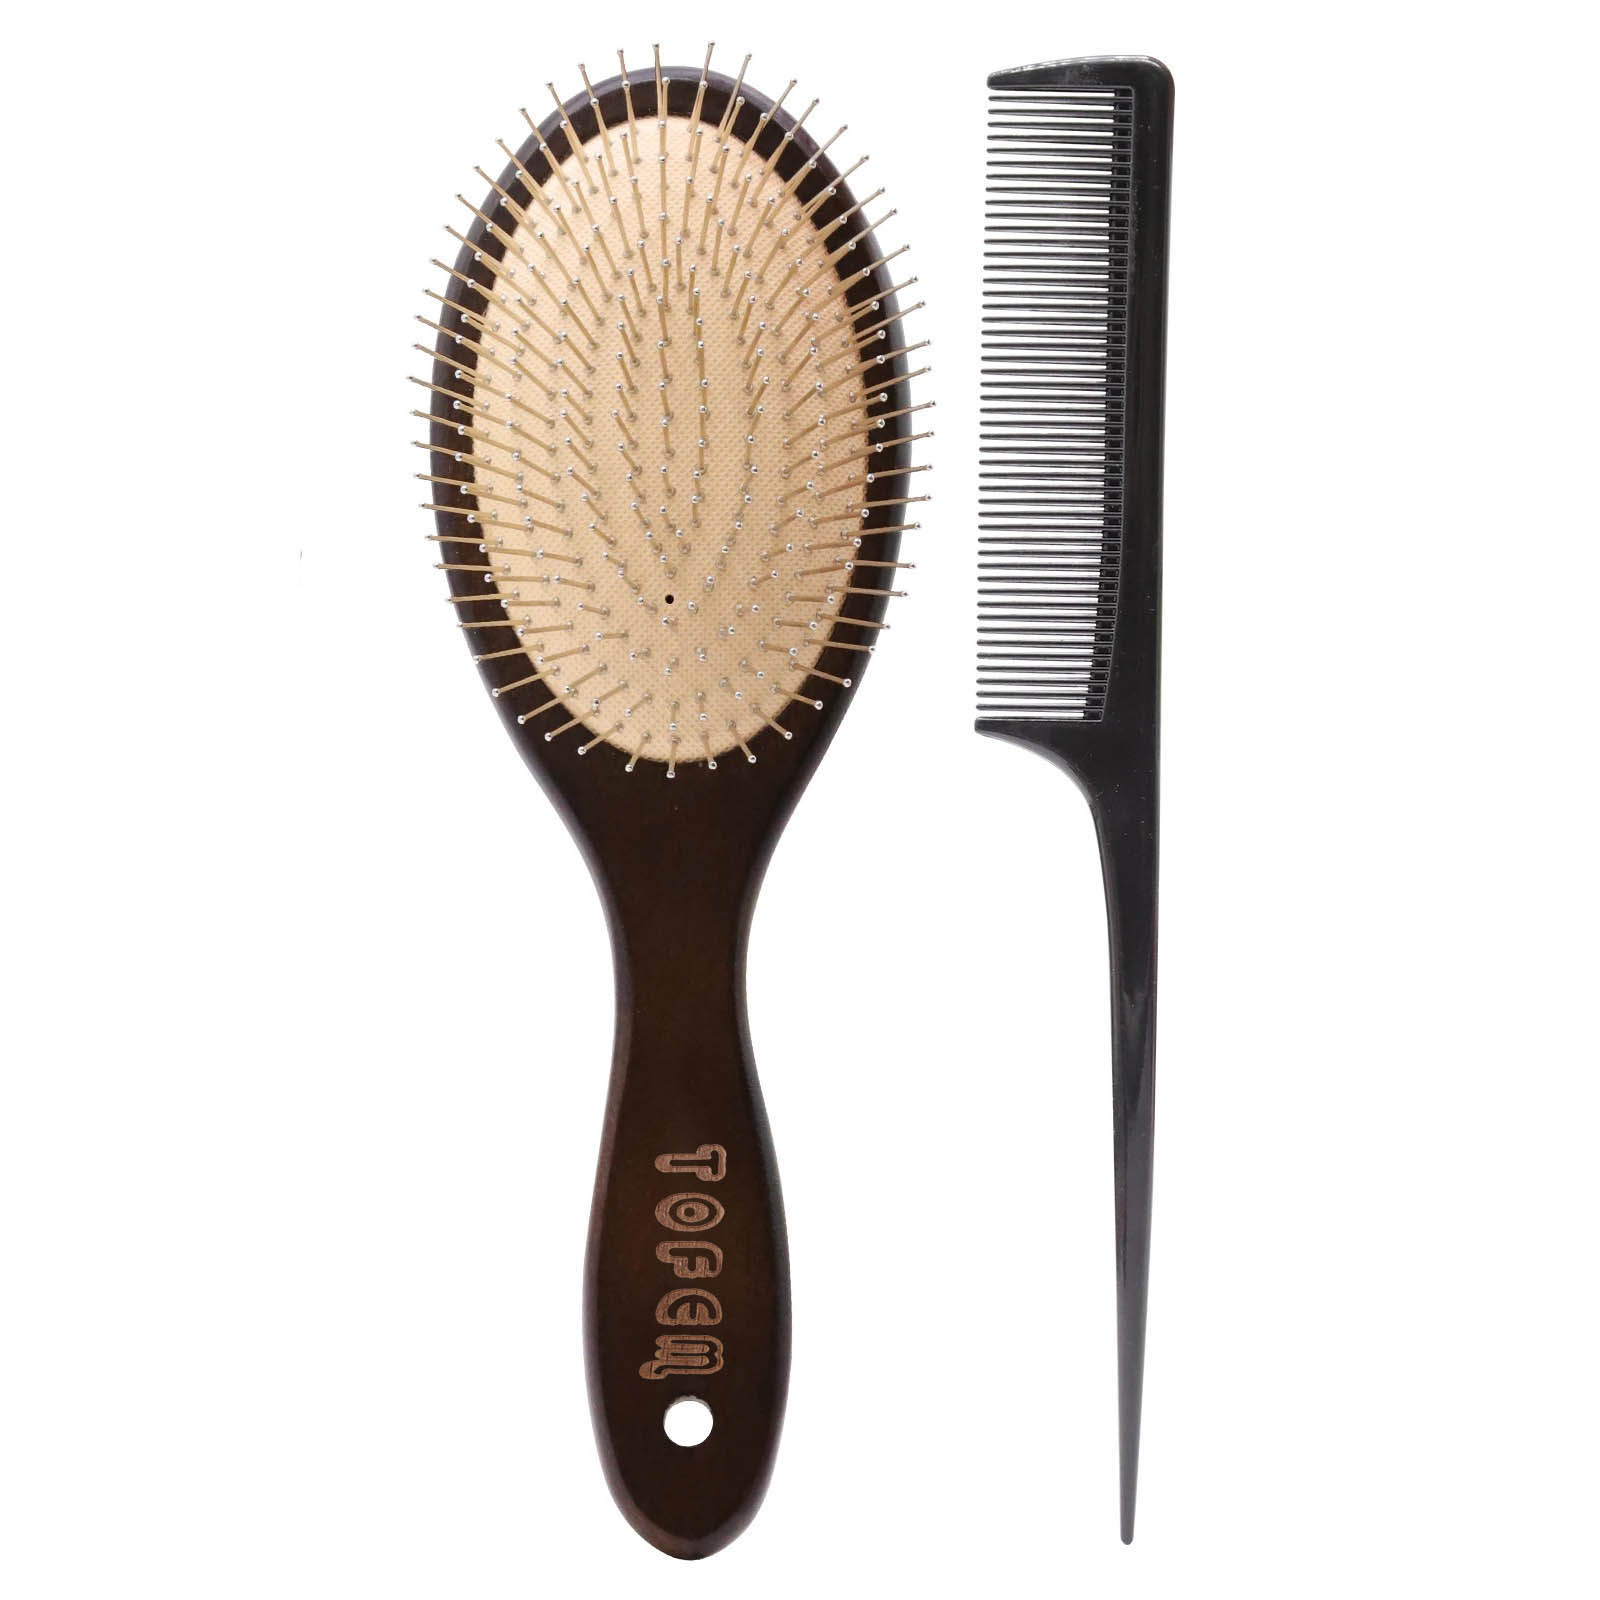 Bristle oval metal hair brush features the sleek metal bristles planted on a flexible rubber cushion.